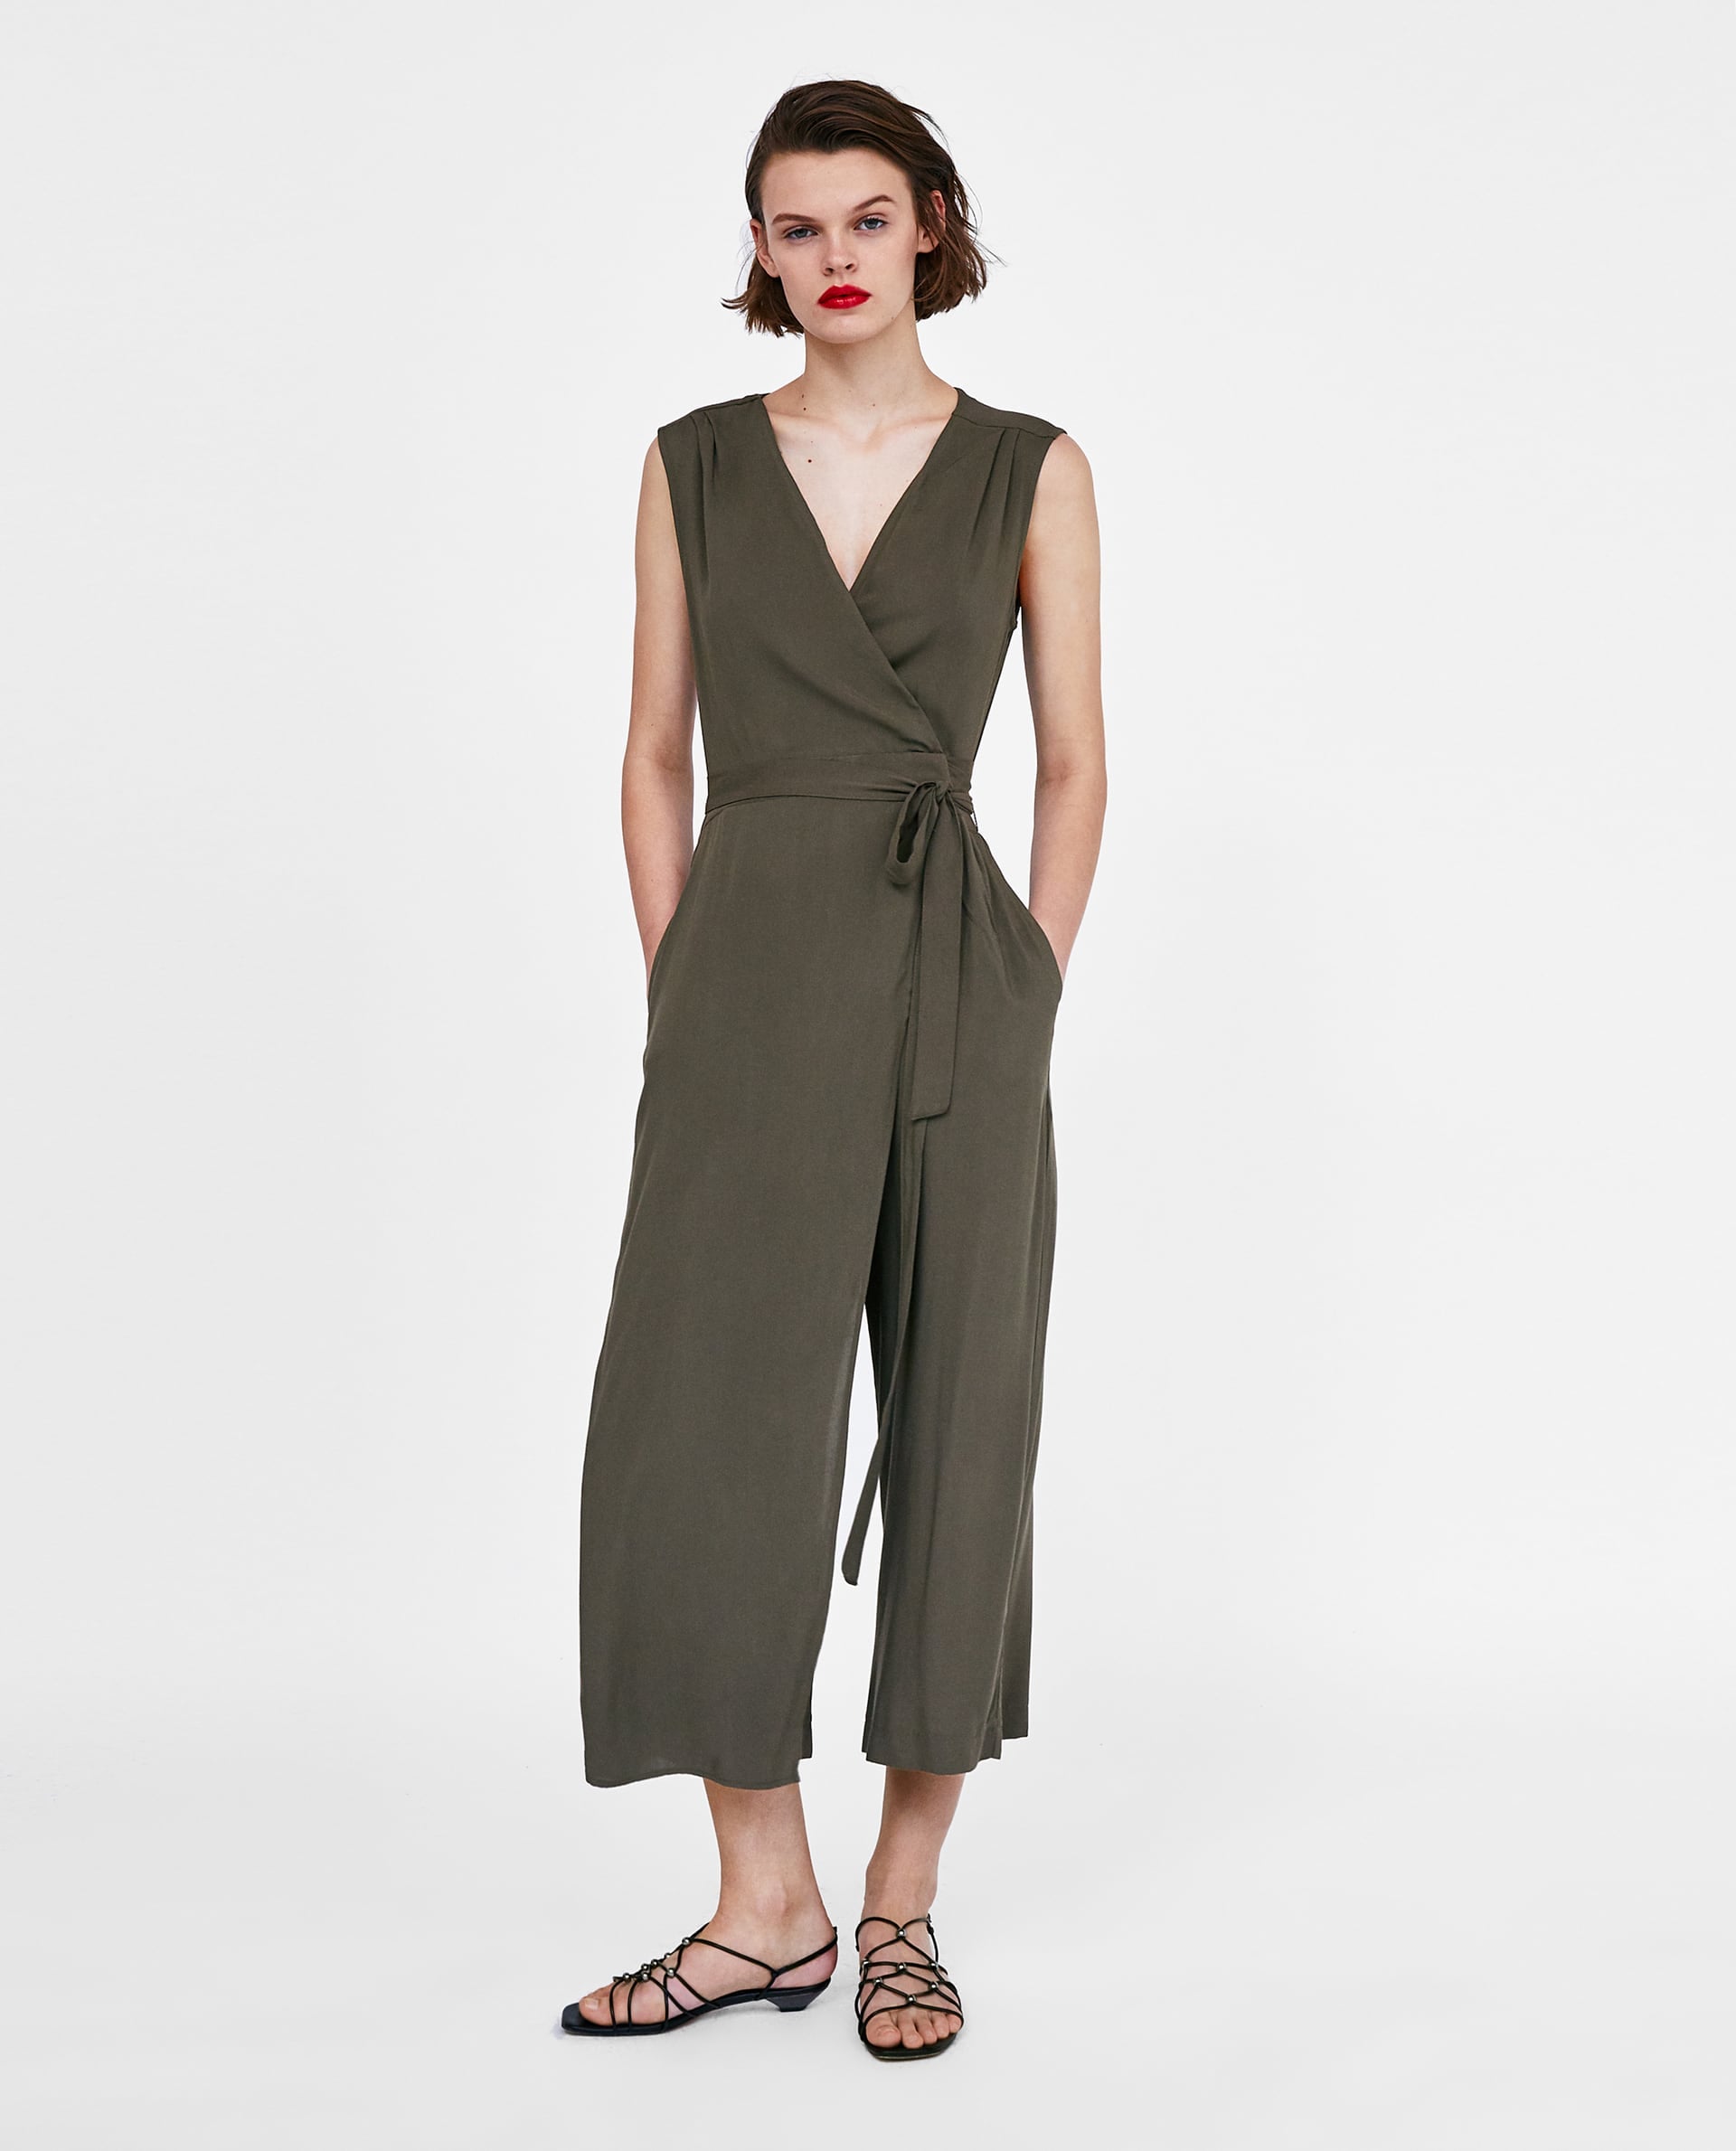 Zara Loose-Fitting Wrap Jumpsuit | Yes 